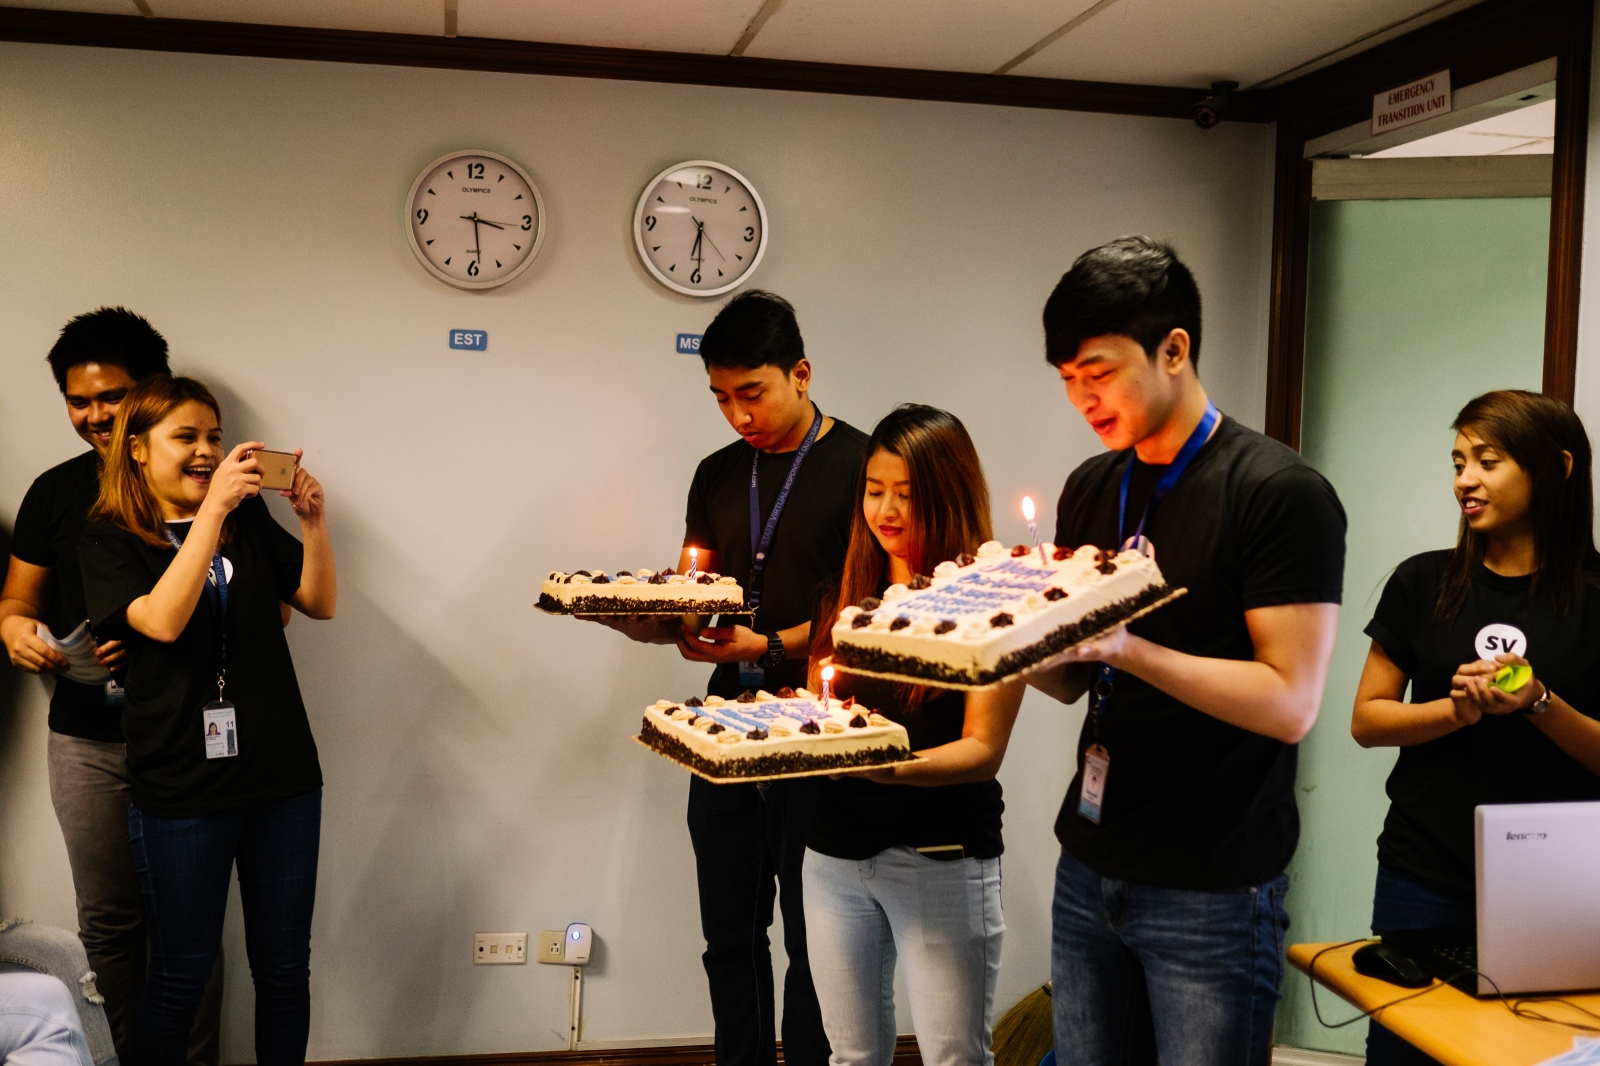 7Am. Once a month in this call center company, owned by Americans, there is an informal meeting to celebrate every birthday from that month. These 3 birthday people were just about to finish their night work shift. Makati, Manila, Philippines. 15th April, 2016.